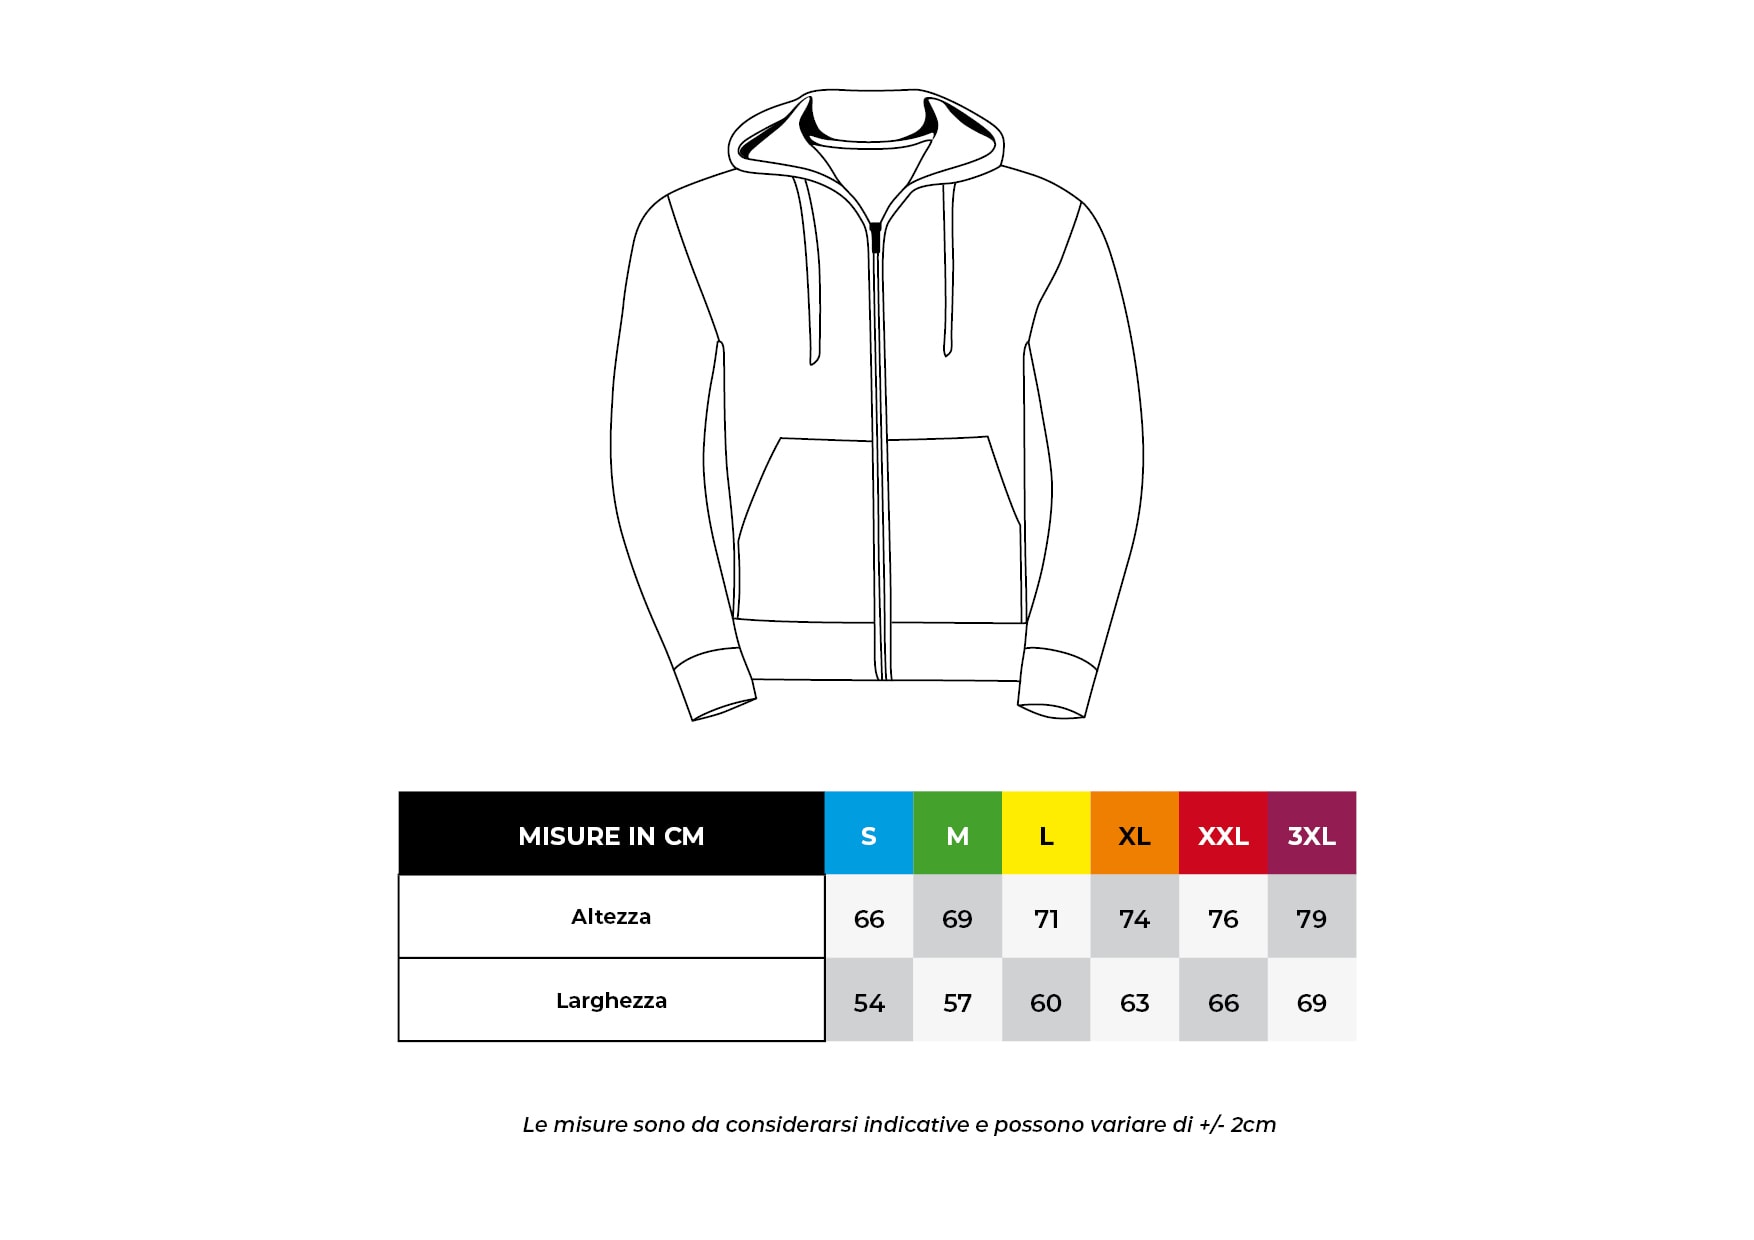 Zipper and hoodie size guide